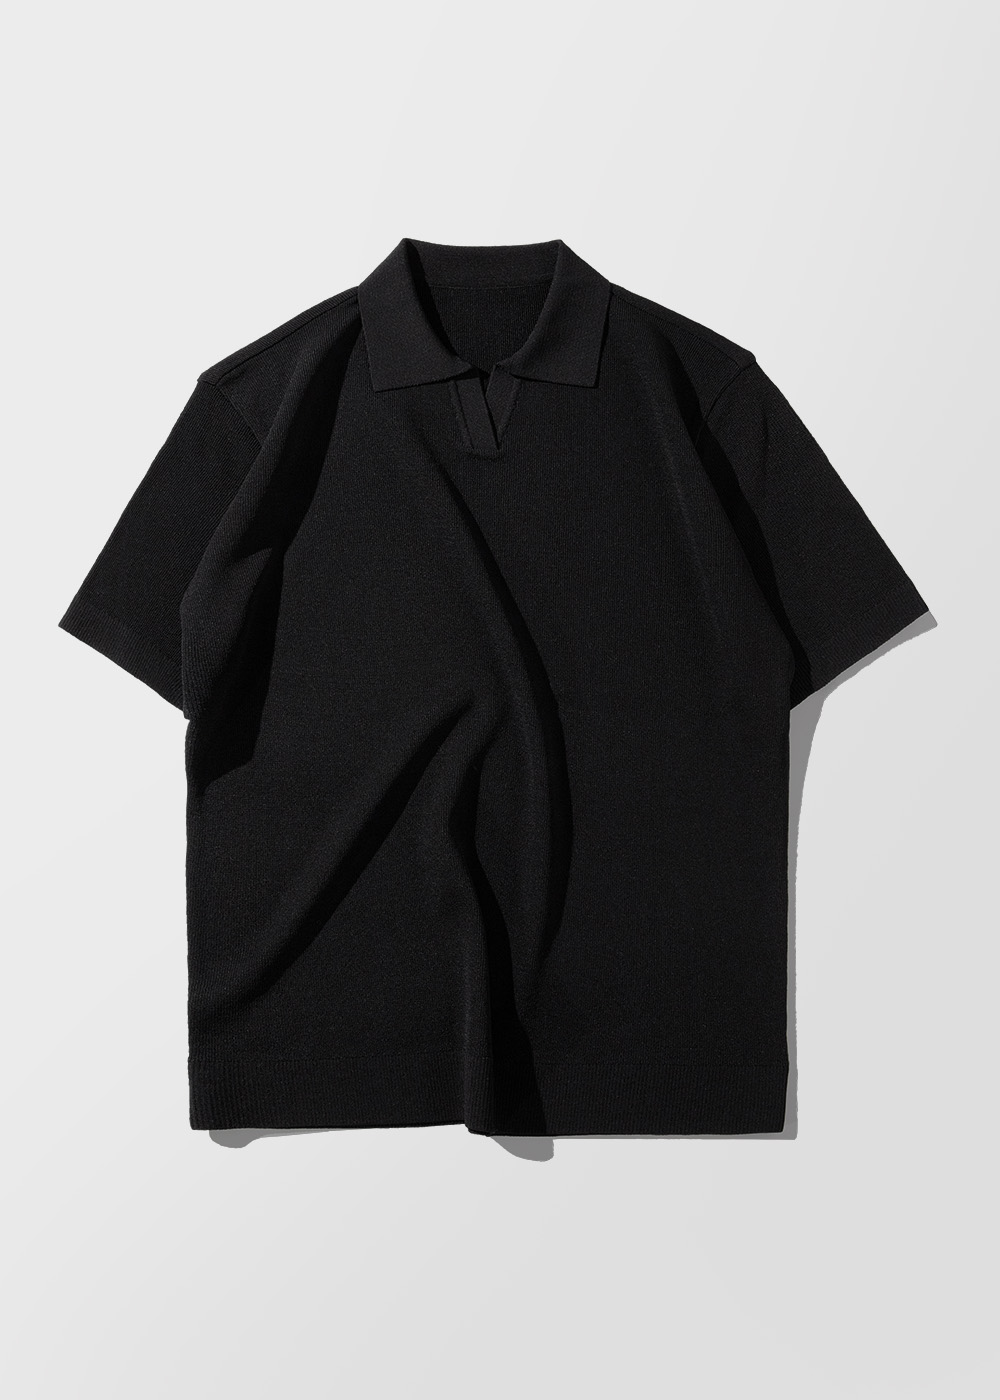 Rayon Blended Waffle Texture Short Sleeve Collar Knit _ triple black